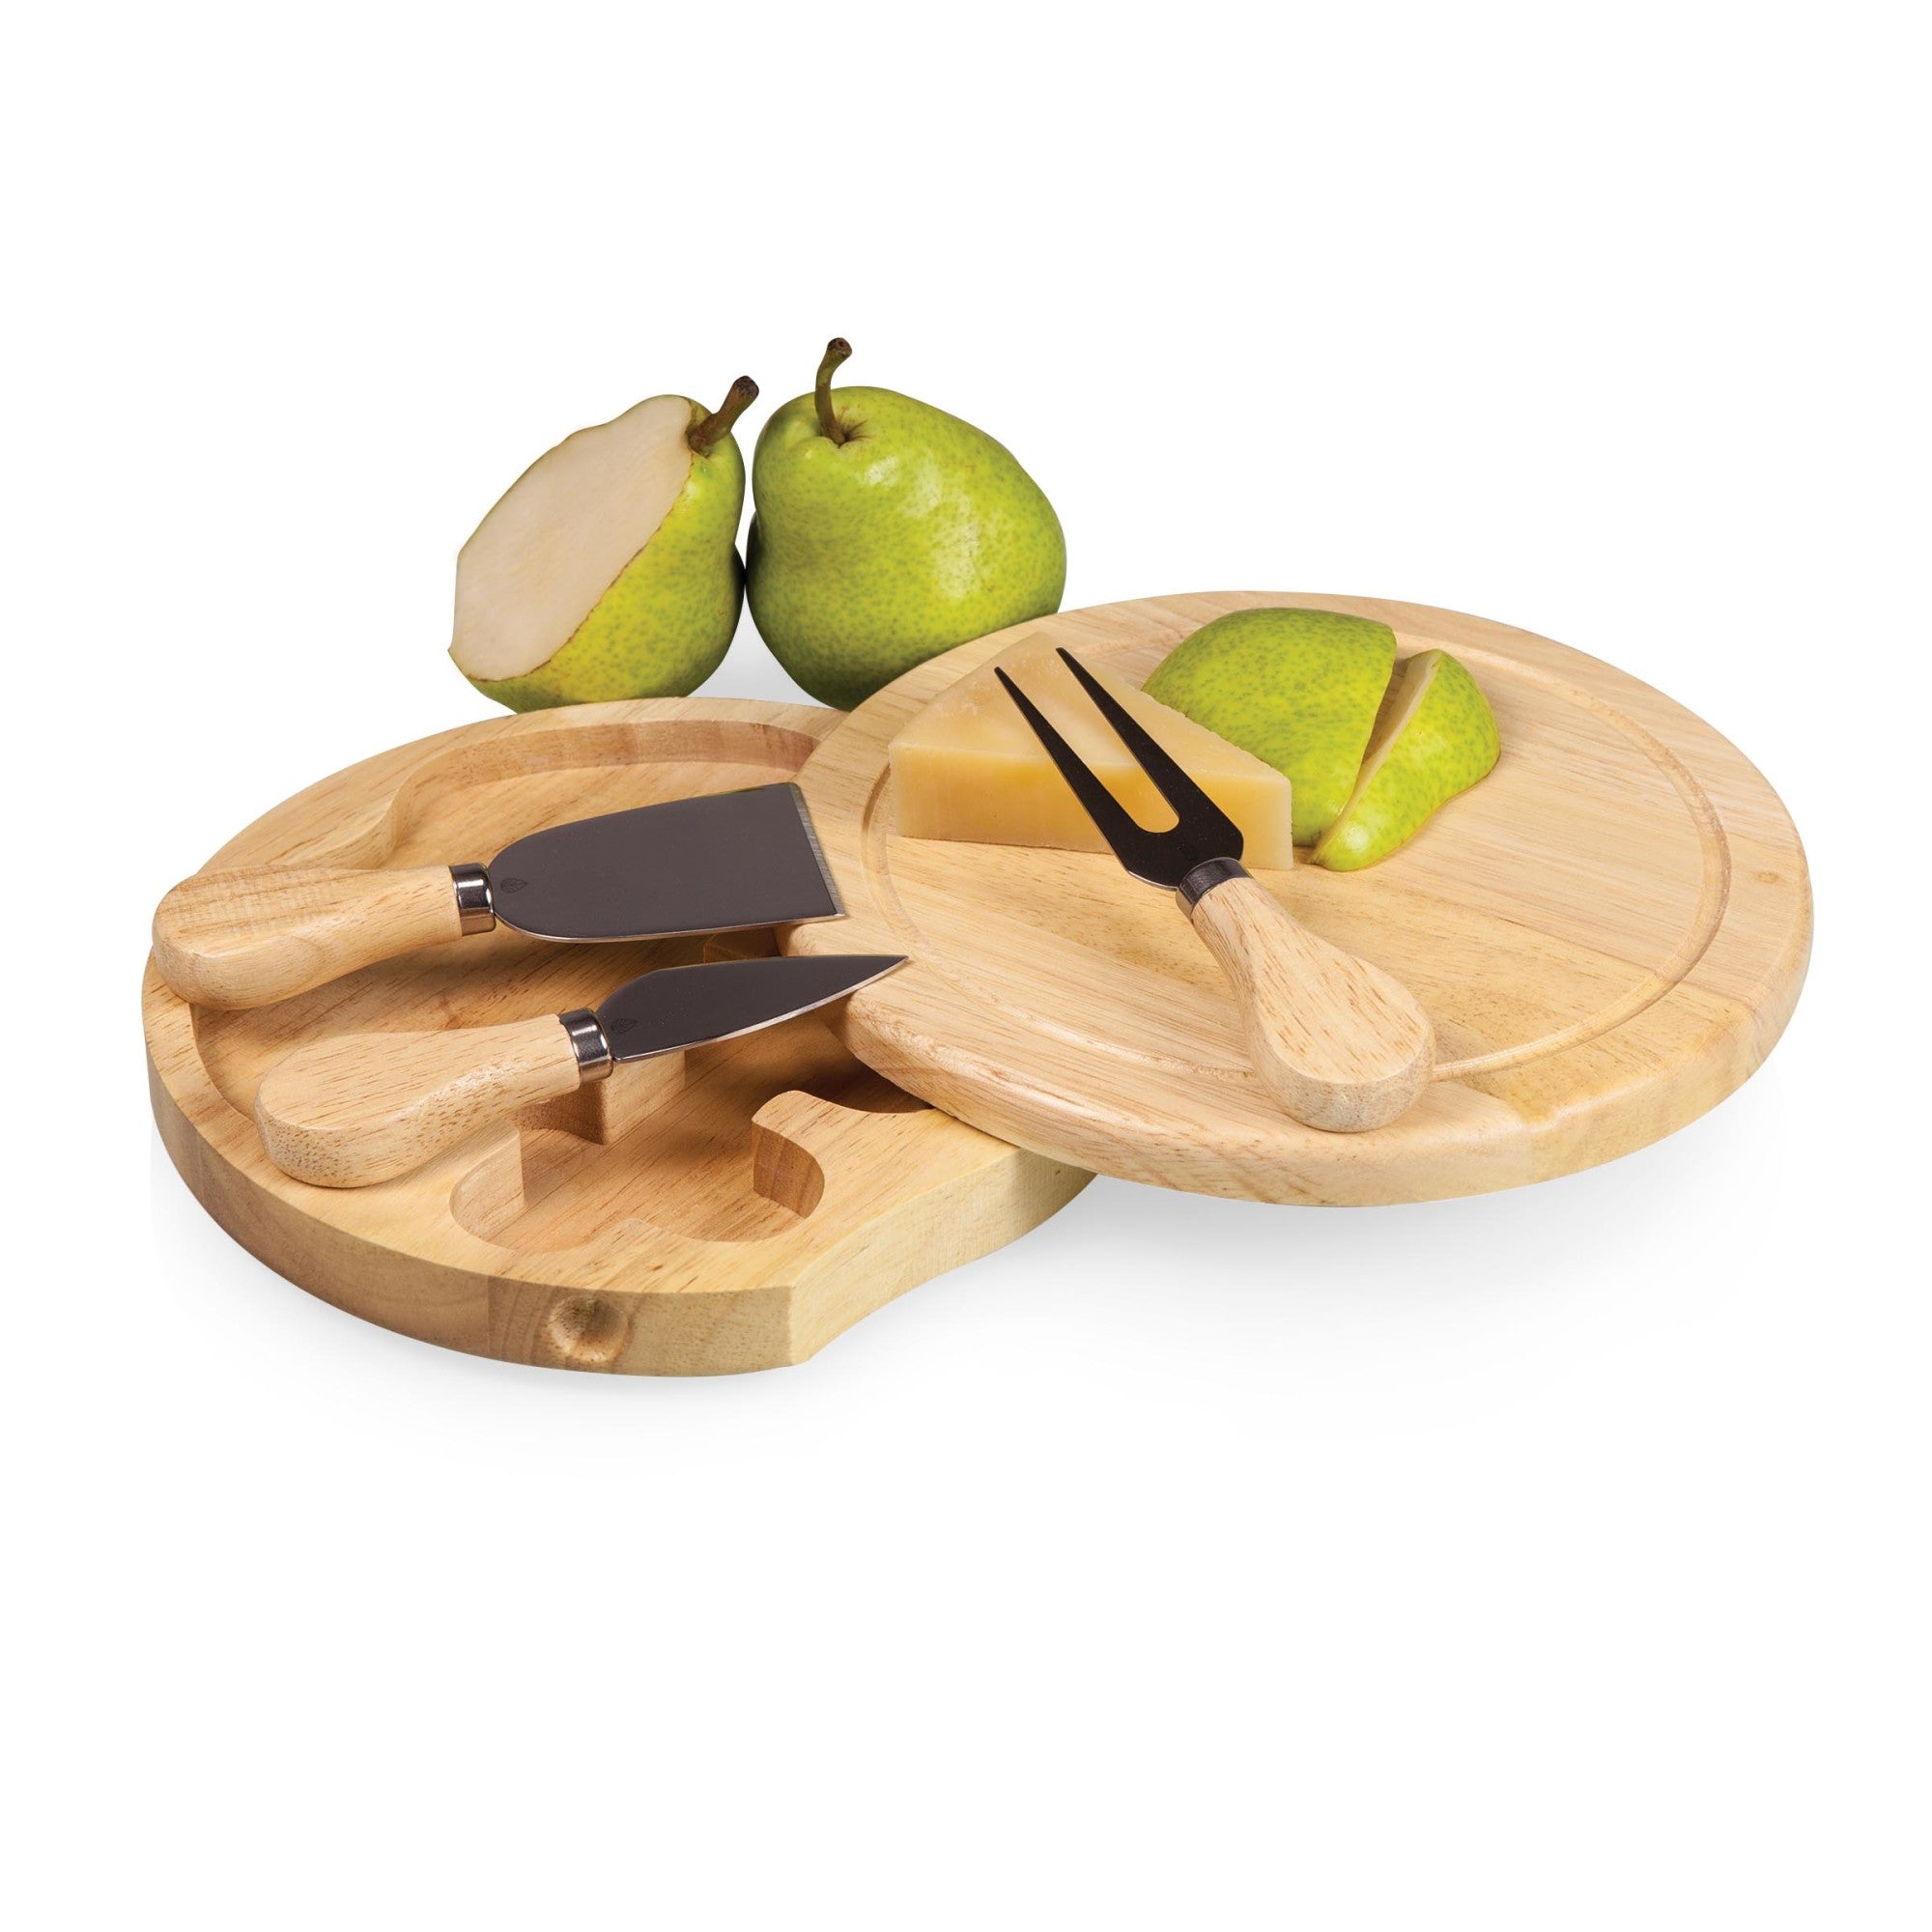 San Francisco 49ers - Brie Cheese Cutting Board & Tools Set